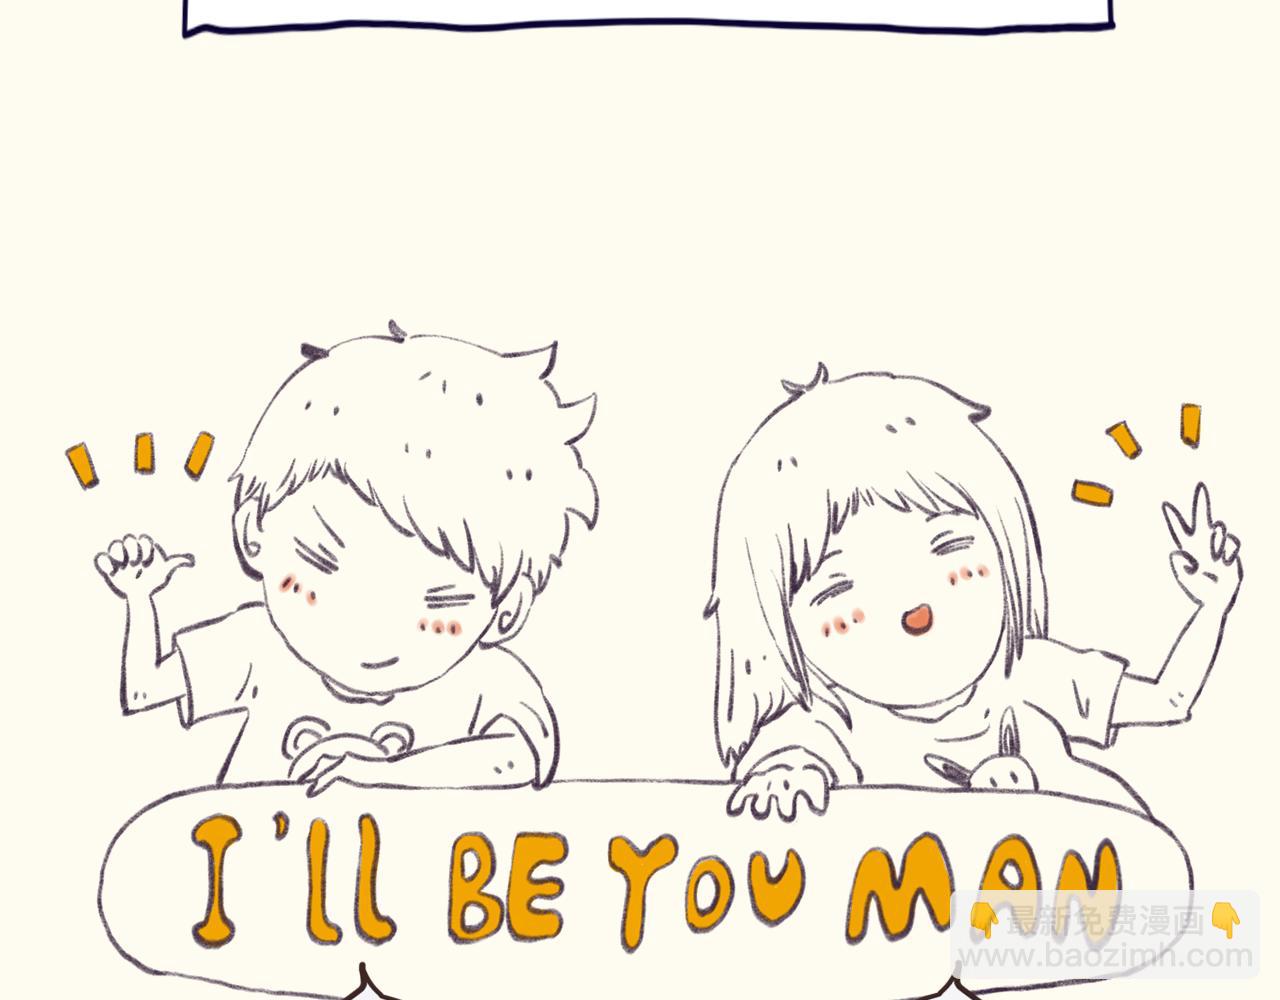 I WELL BE YOU MAN - 4·出門 - 5